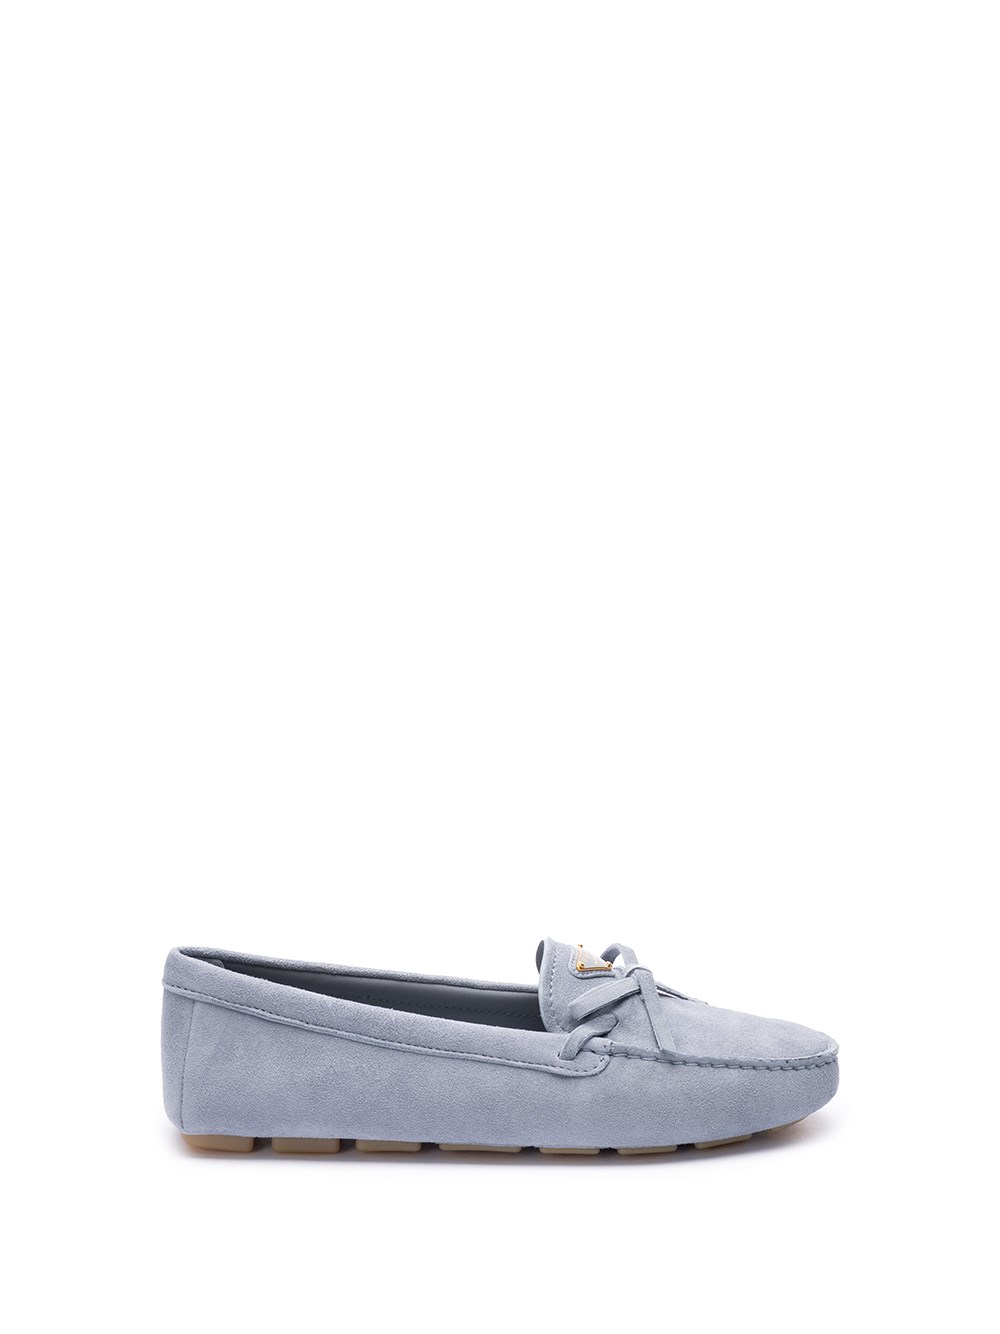 Prada Suede Driving Shoes In Blue